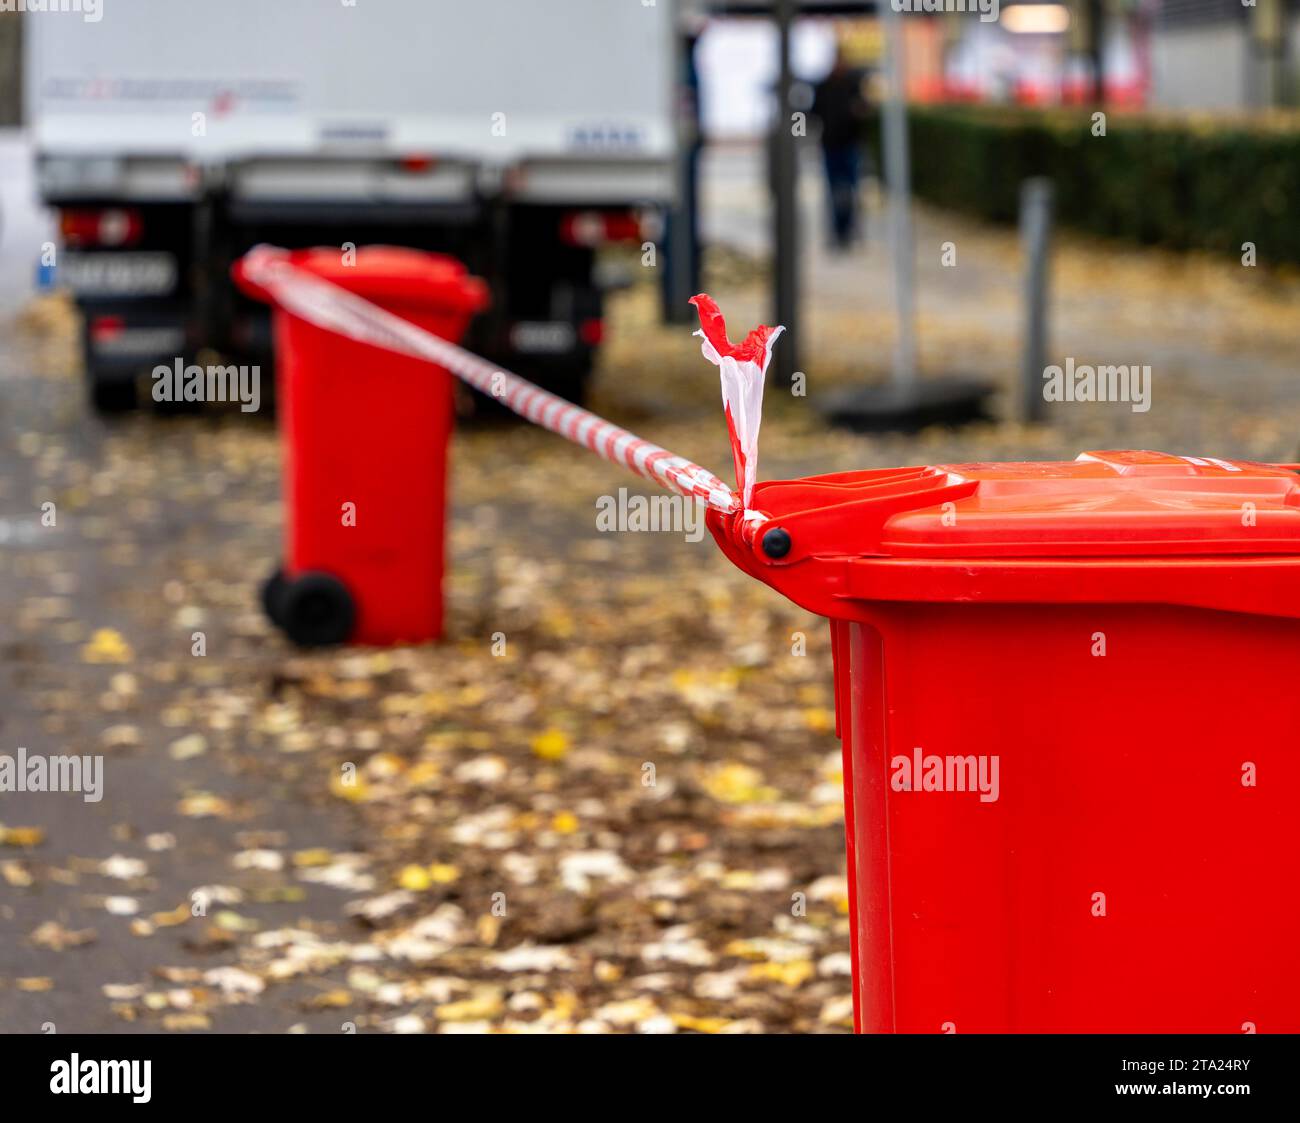 Barrier, red rubbish bins with red and white barrier tape, Berlin ...